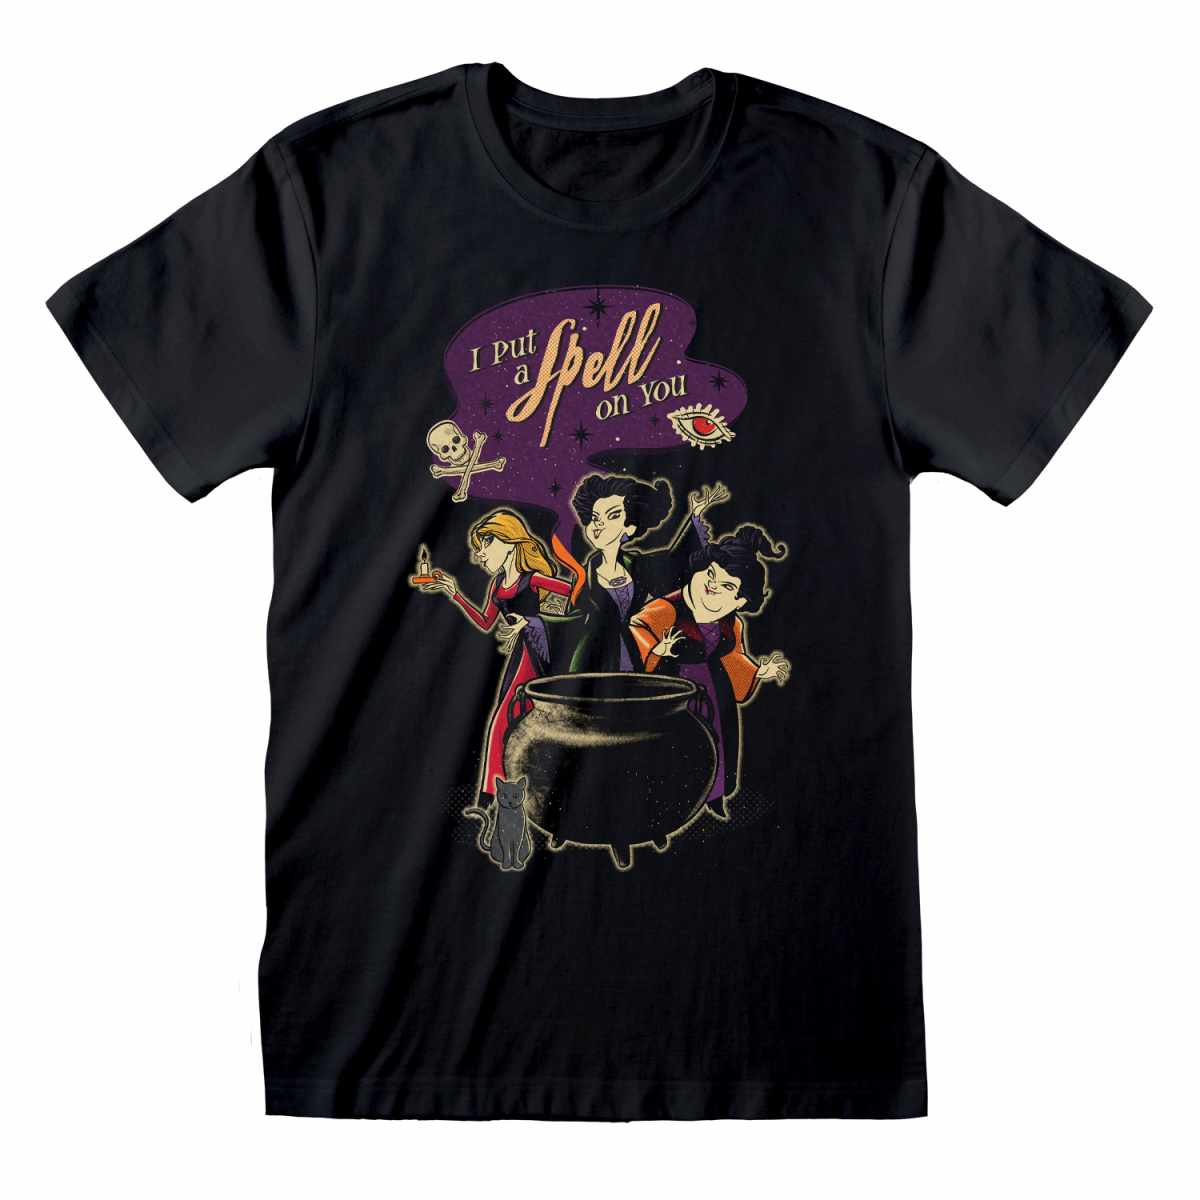 Hocus Pocus Spell On You T-Shirt